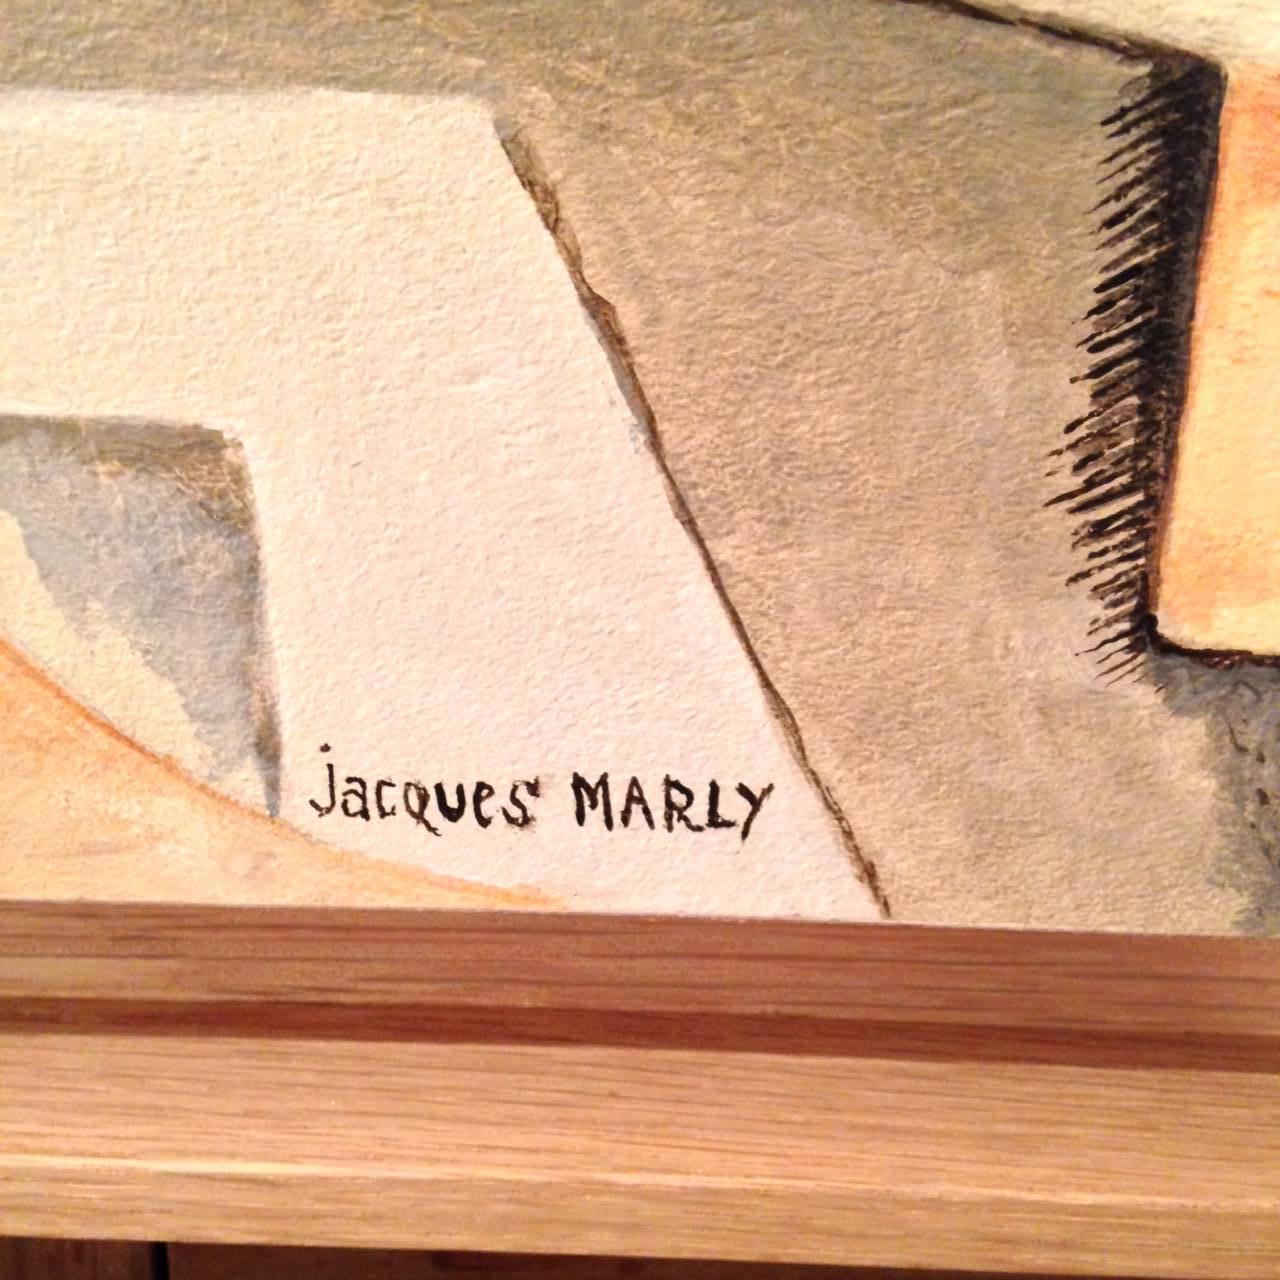 French 20th Century Acrylic and Mixte Technique by Jacques Marly